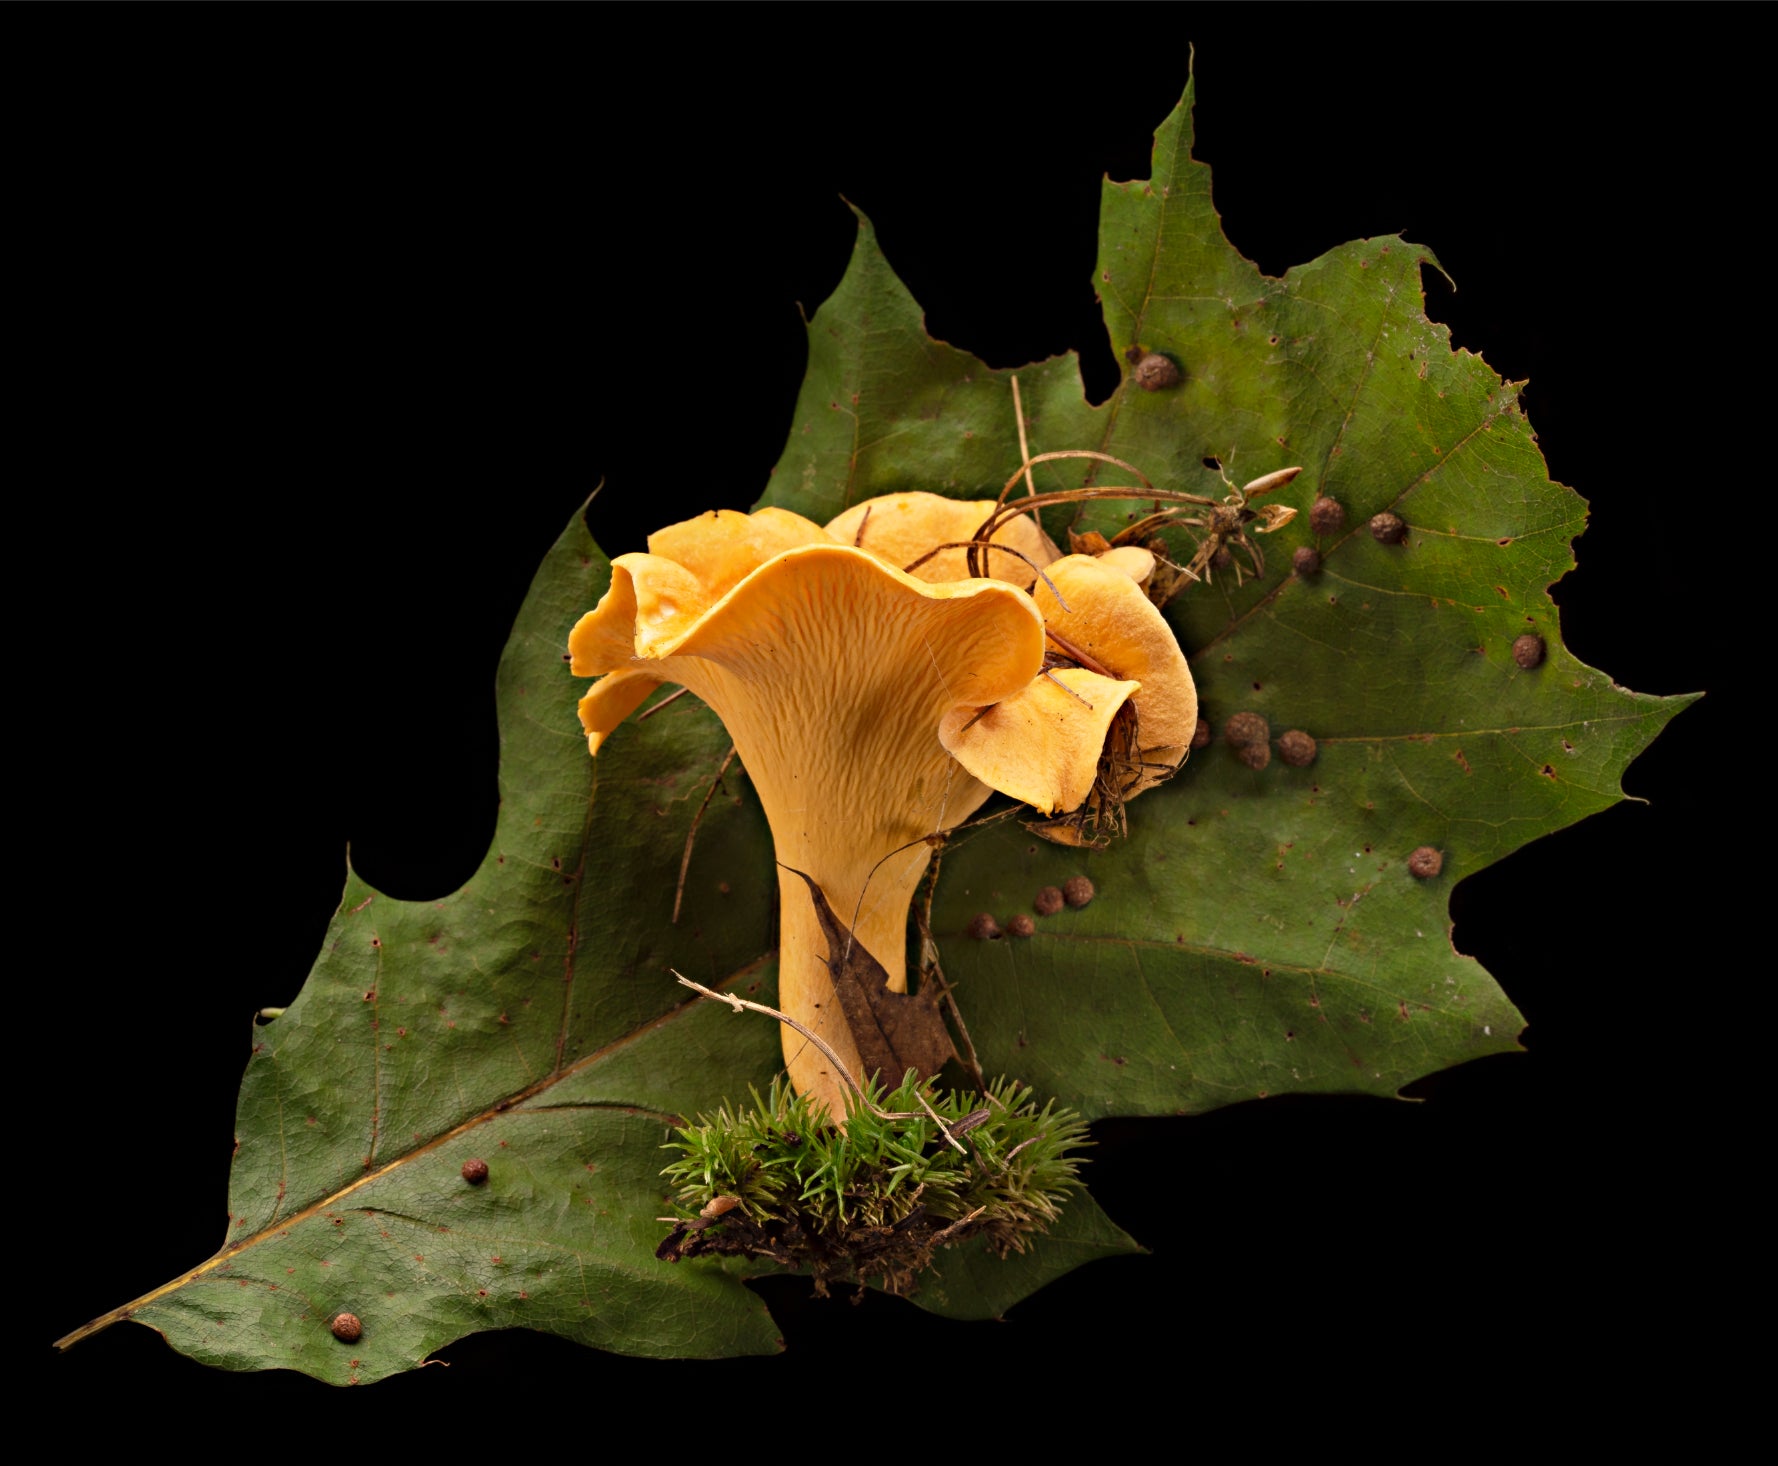 "CHANTERELLE" By Frank Spinelli